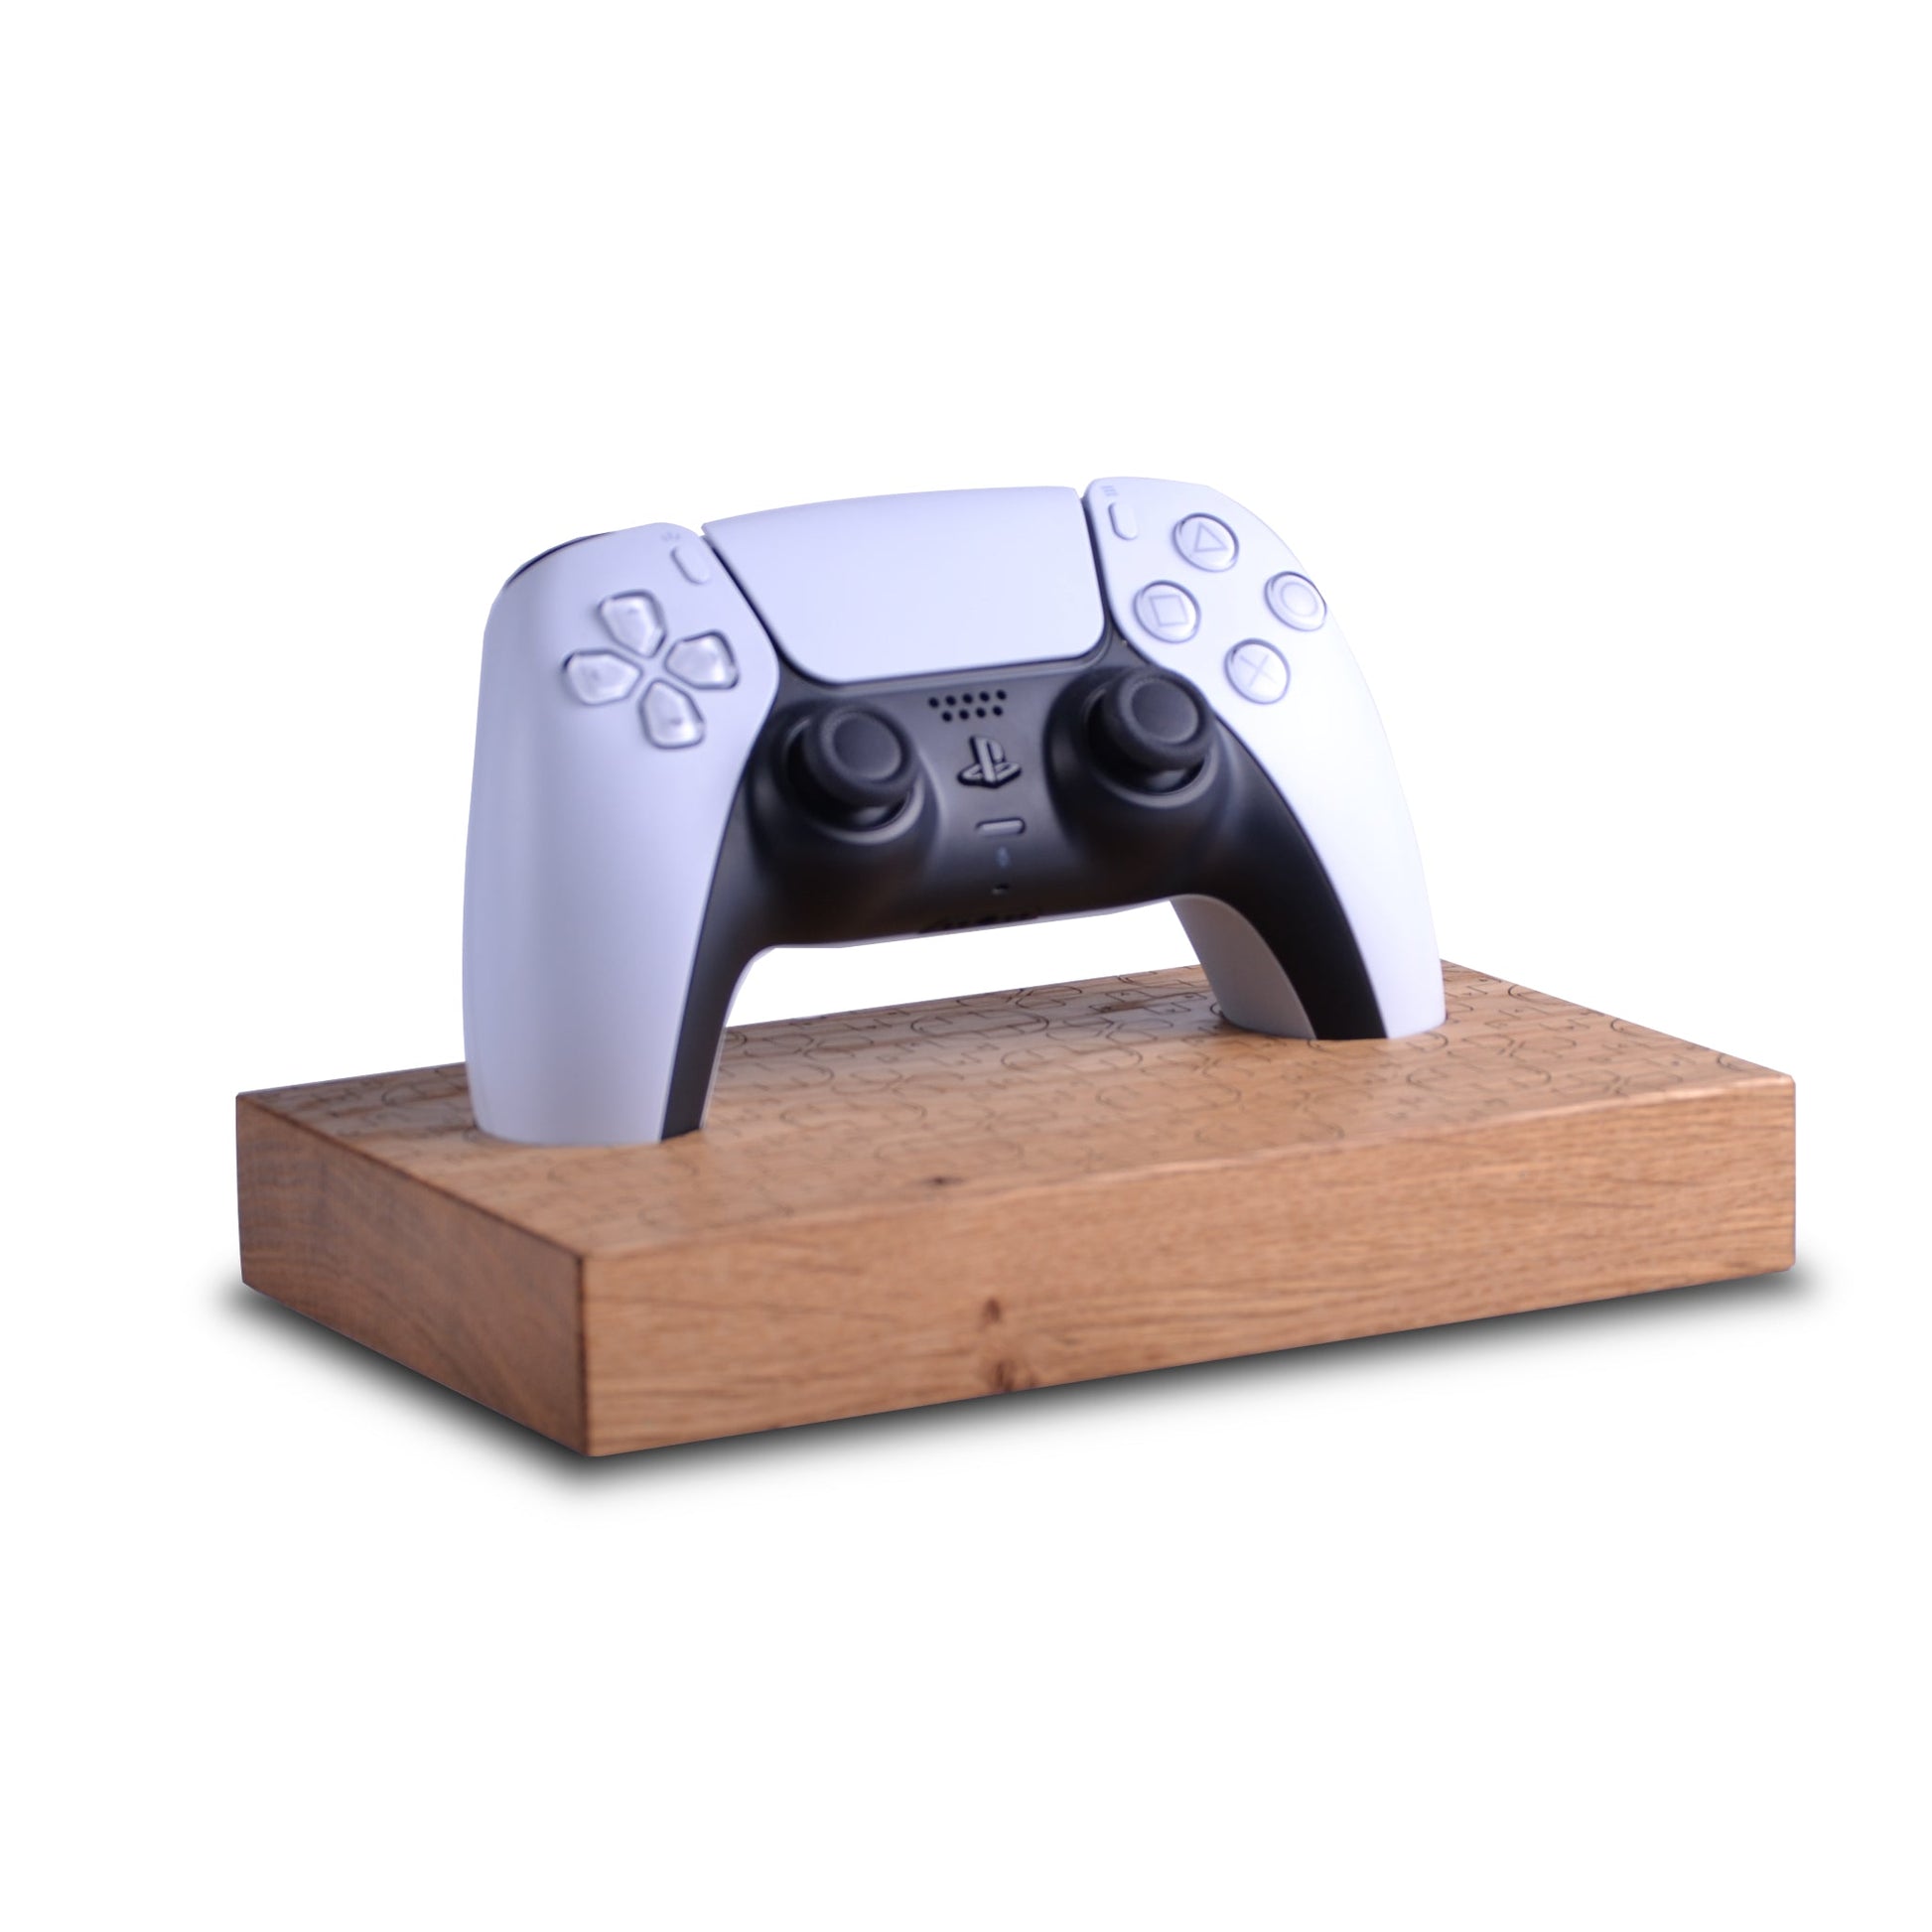 Wooden stand with d-pad design for Playstation 5 dualsense controller